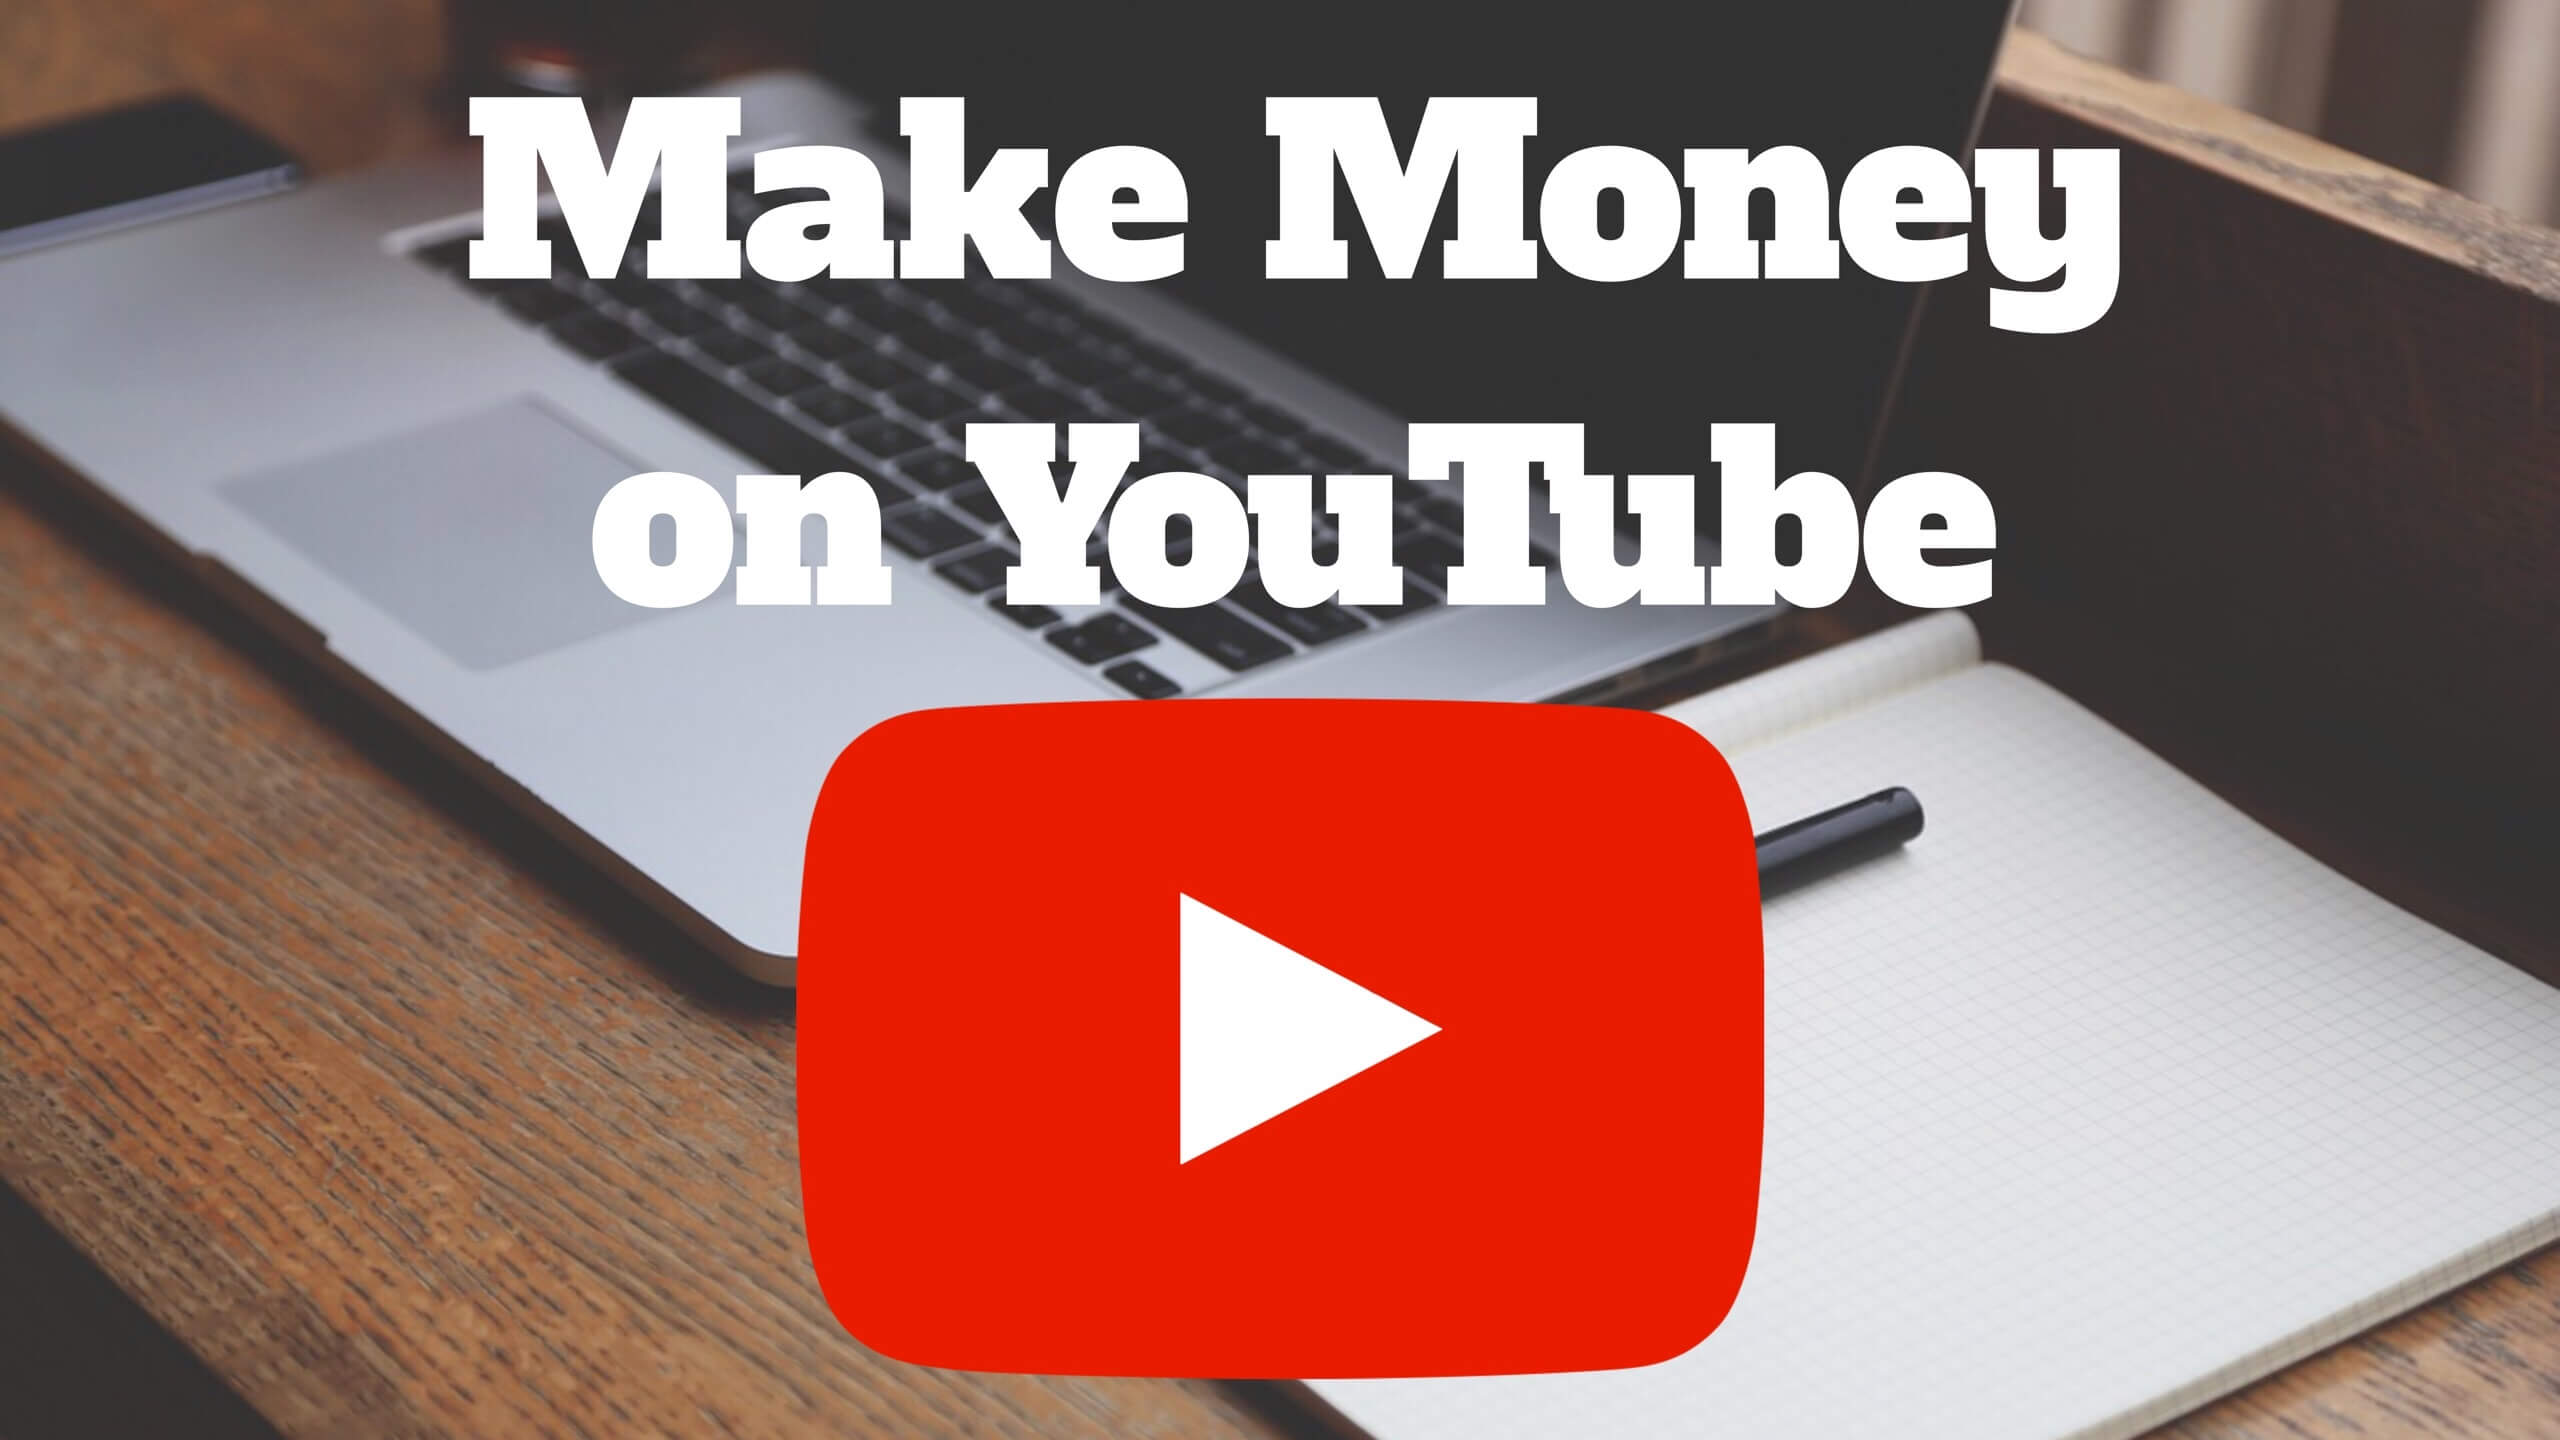 How to Make Money from YouTube